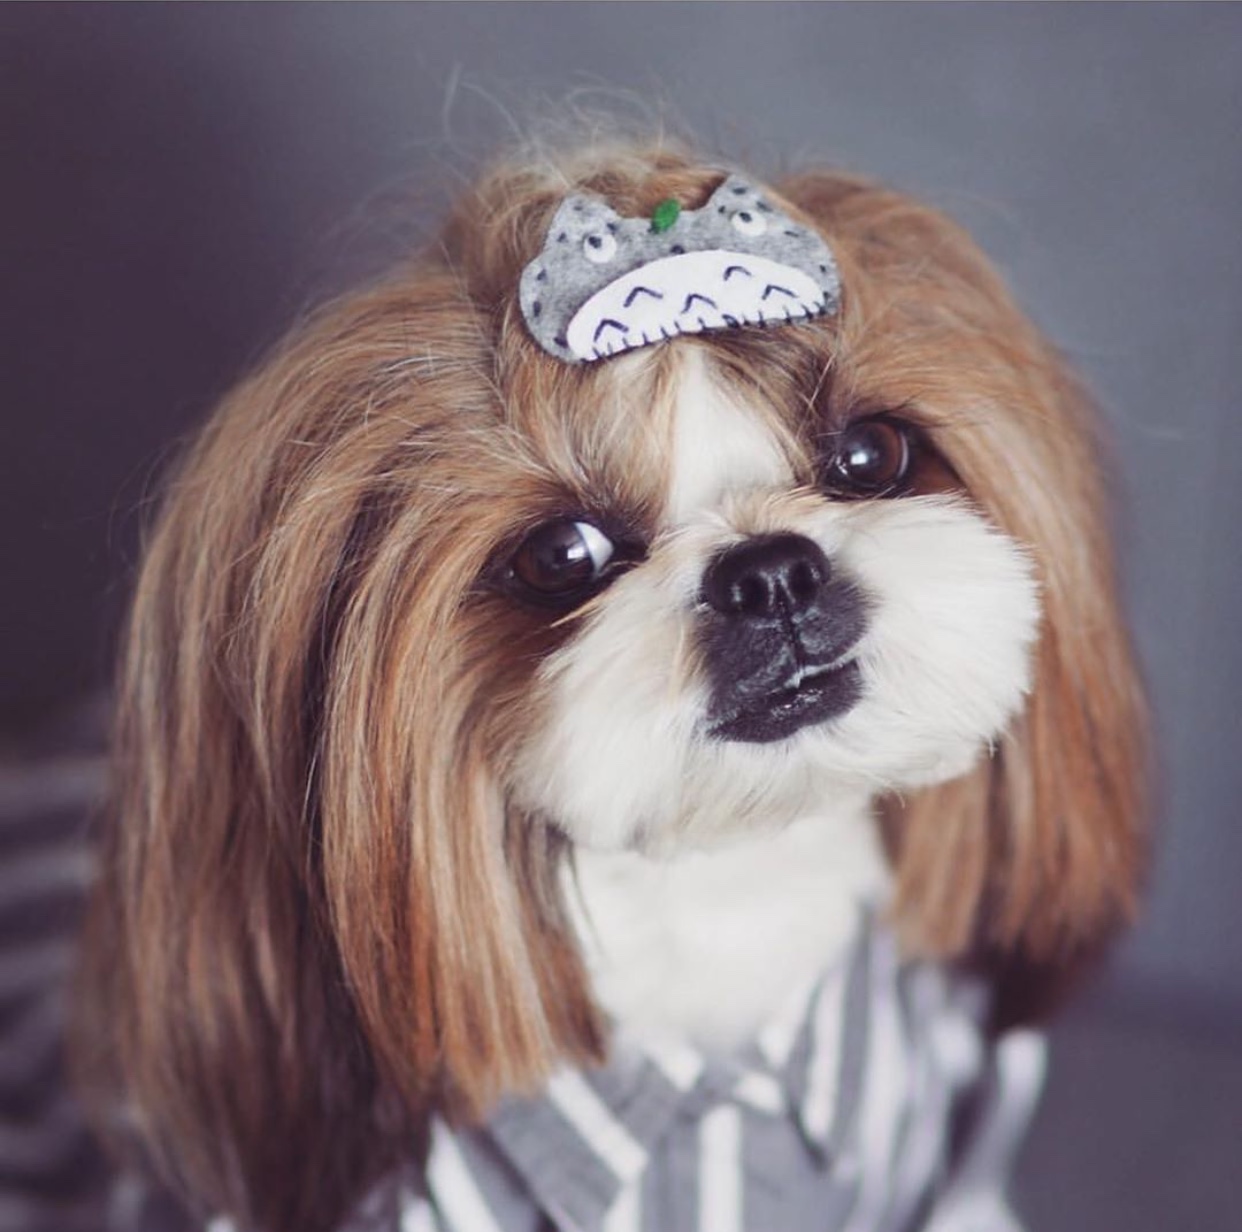 A Shih Tzu wearing her pajamas while sitting on the floor